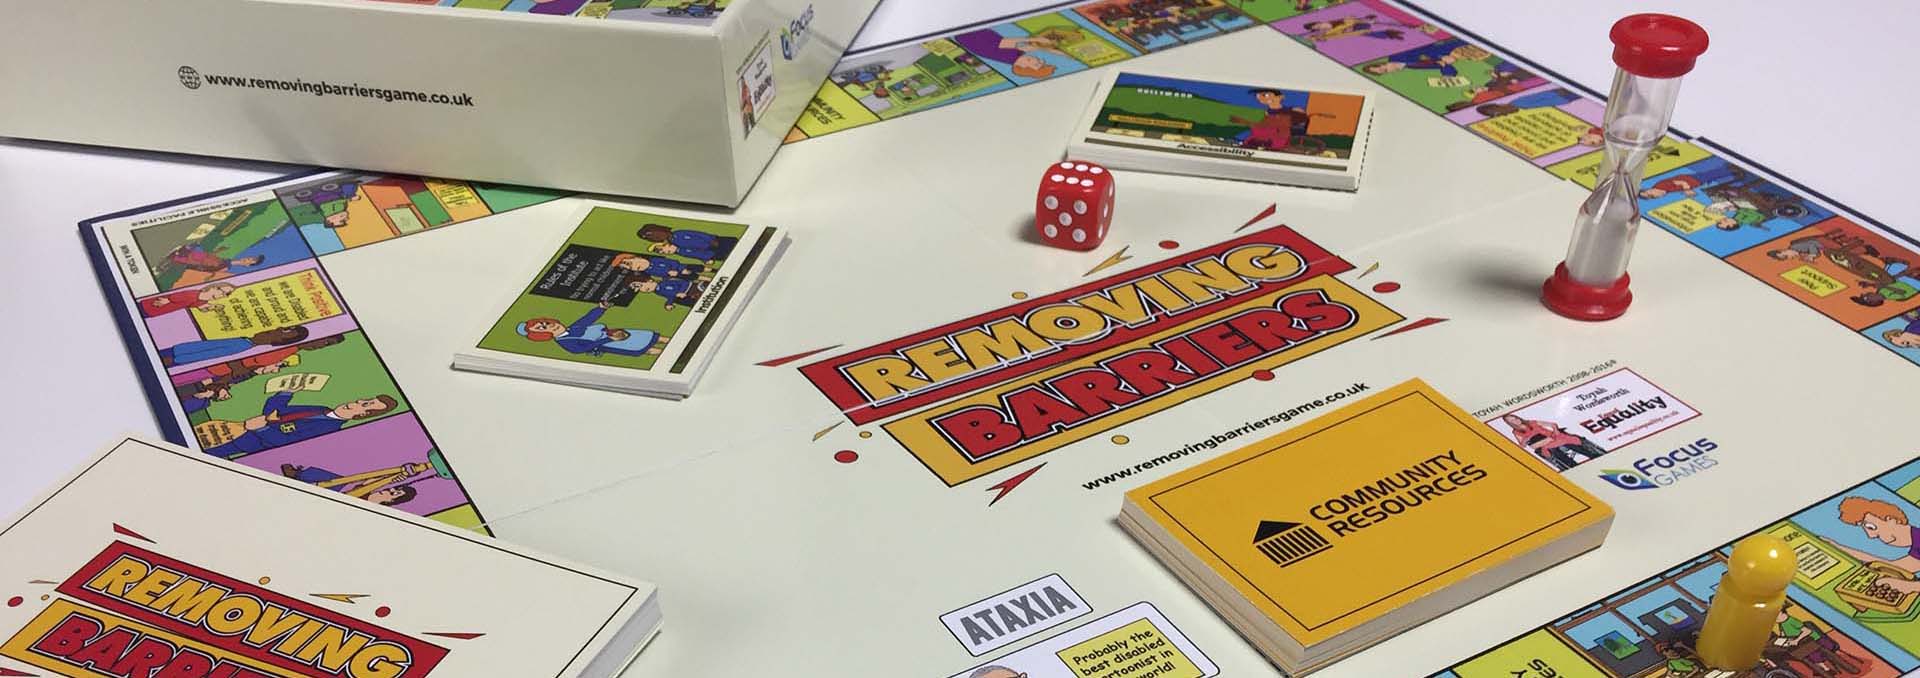 The Removing Barriers Game comes with a board and four different categories of question card.